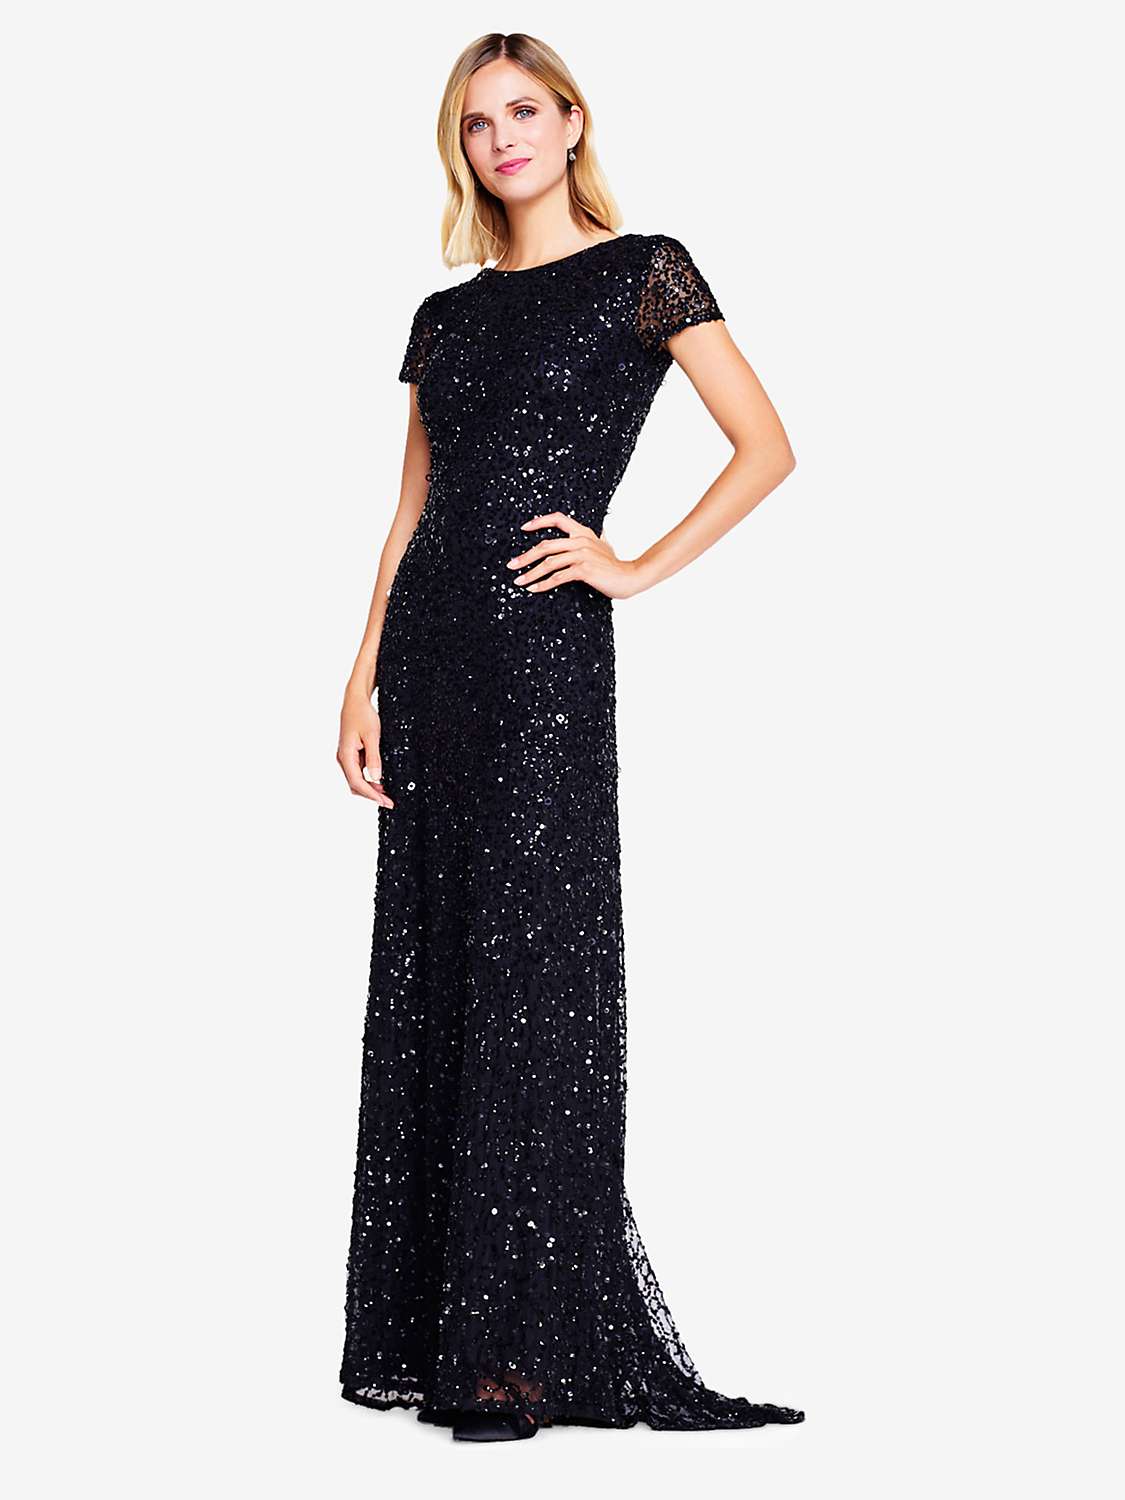 Buy Adrianna Papell Scoop Back Sequin Maxi Dress, Black Online at johnlewis.com